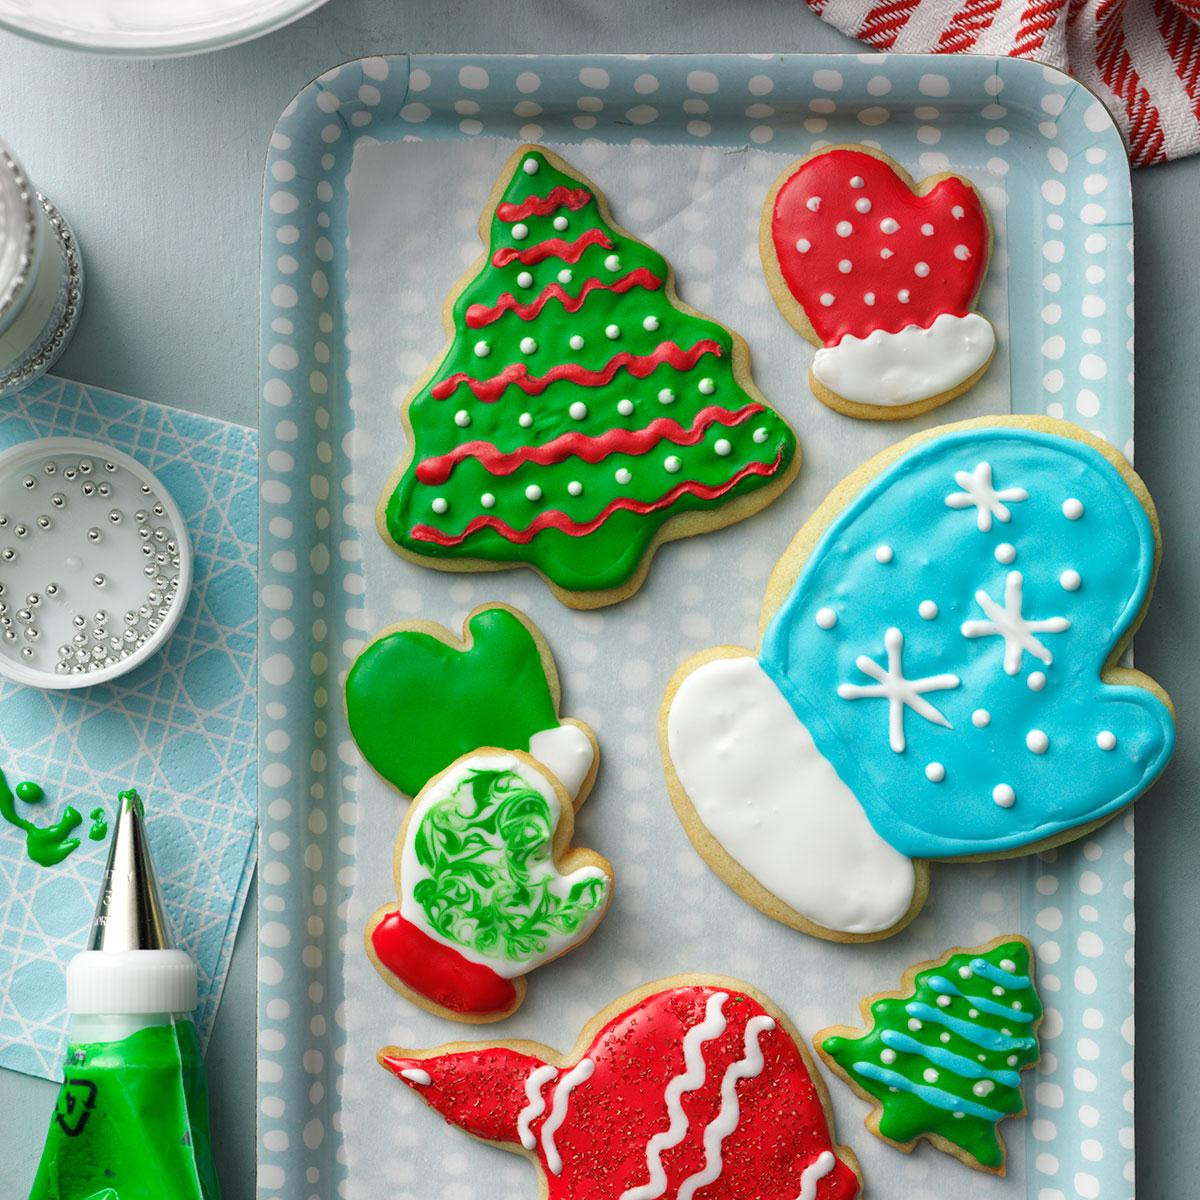 Best Christmas Cookie Icing
 10 Best Christmas Cookie Recipes